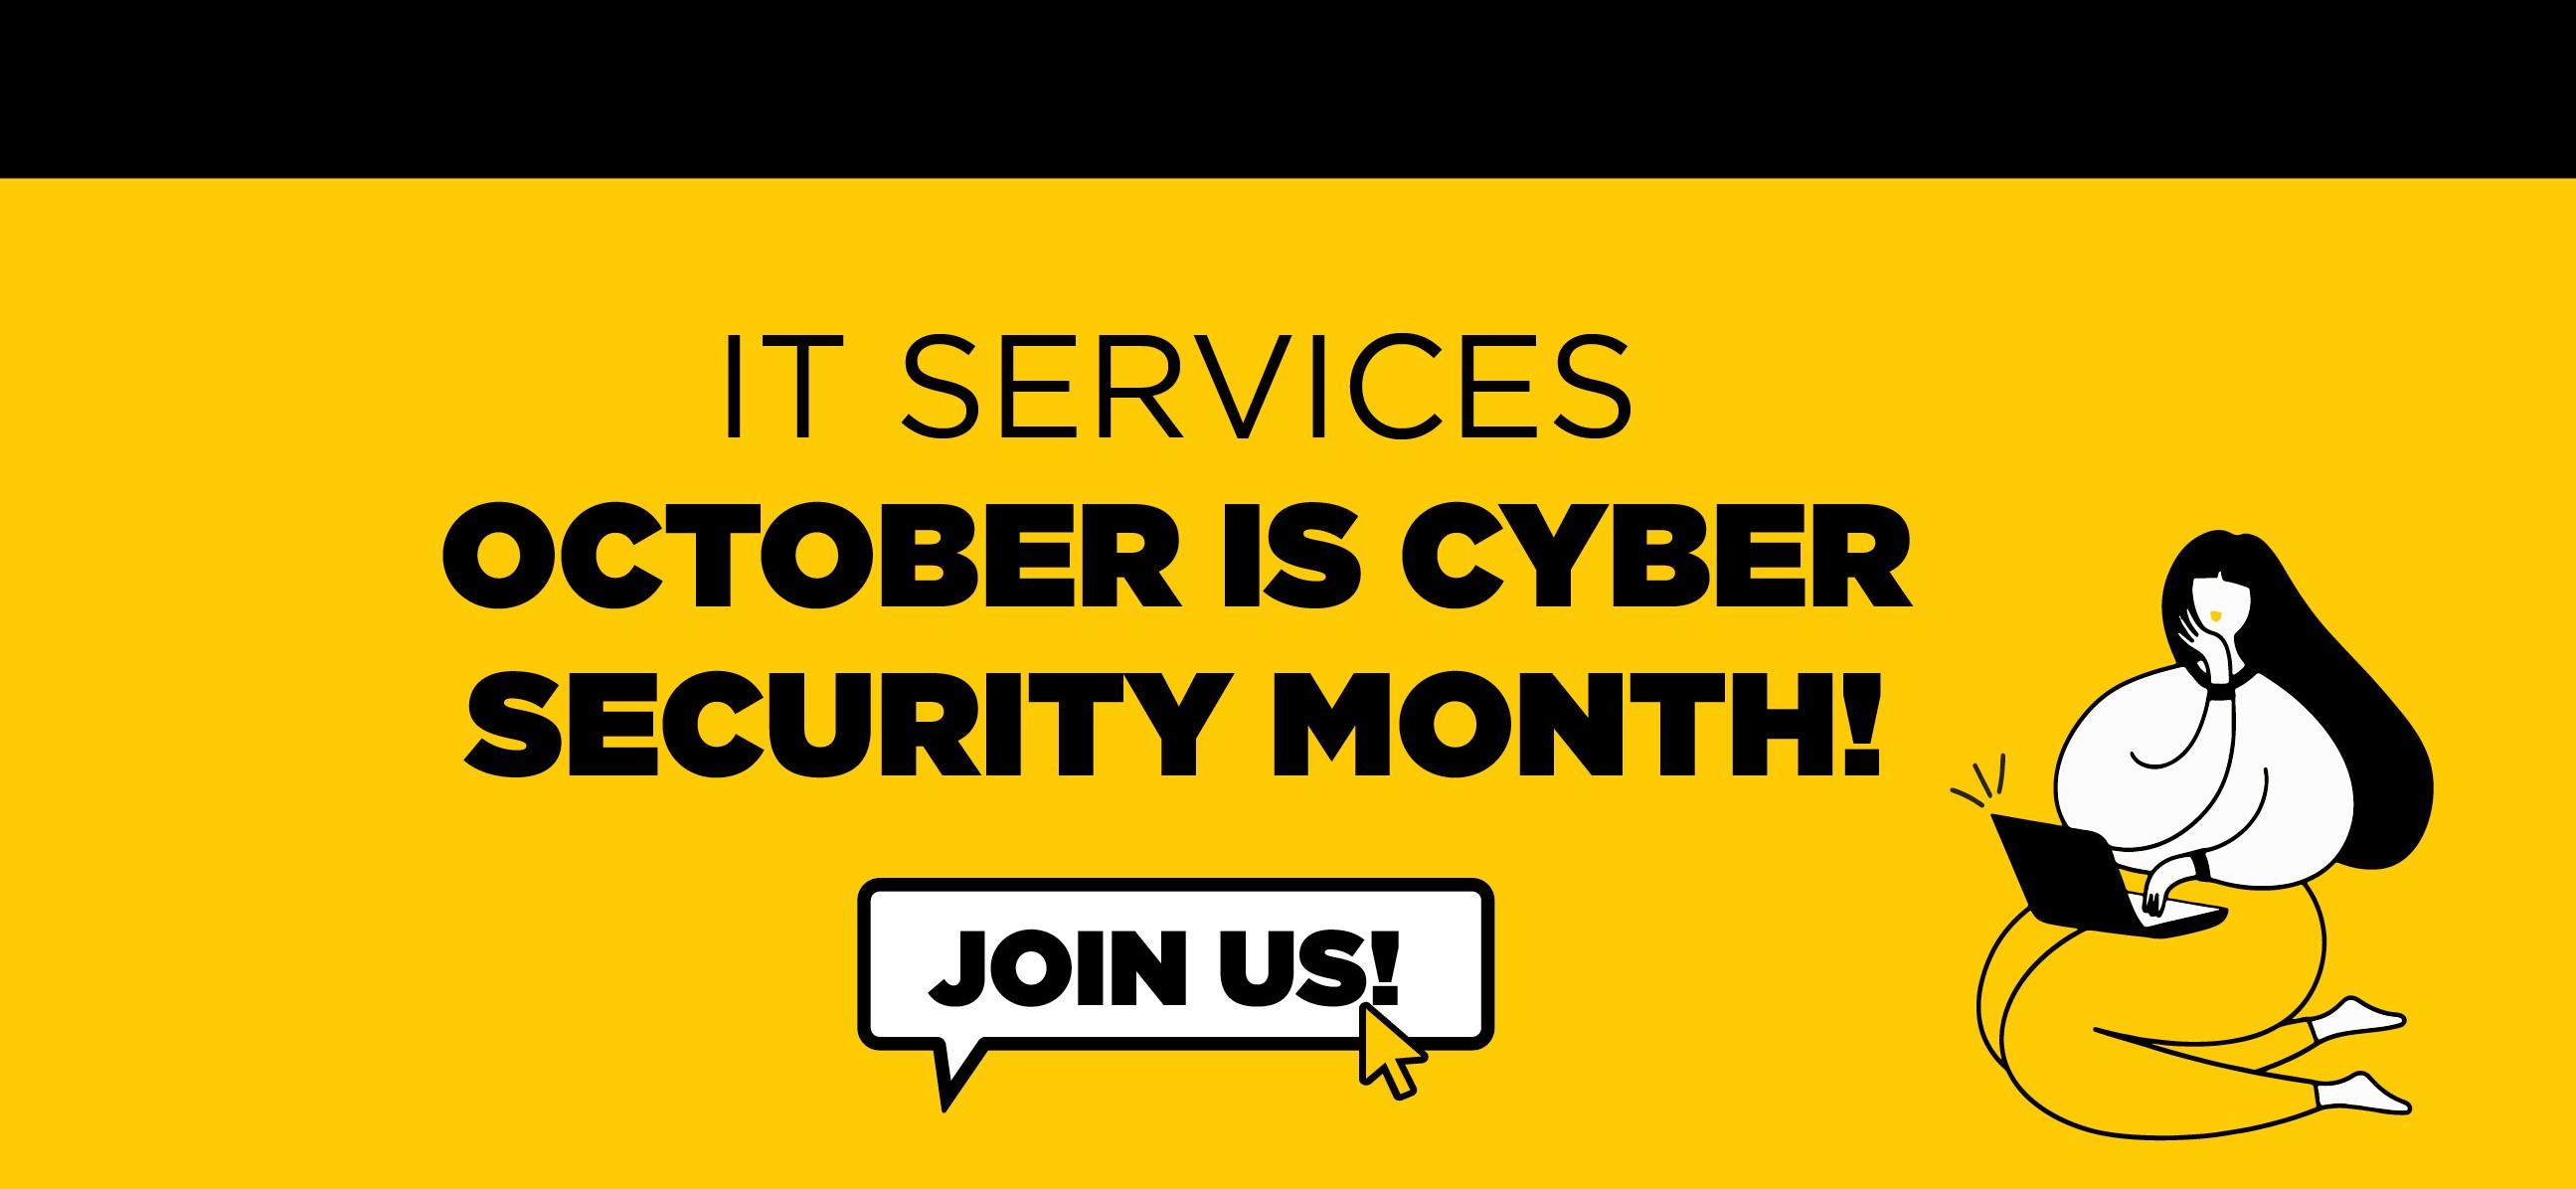 October is Cyber Security Month!